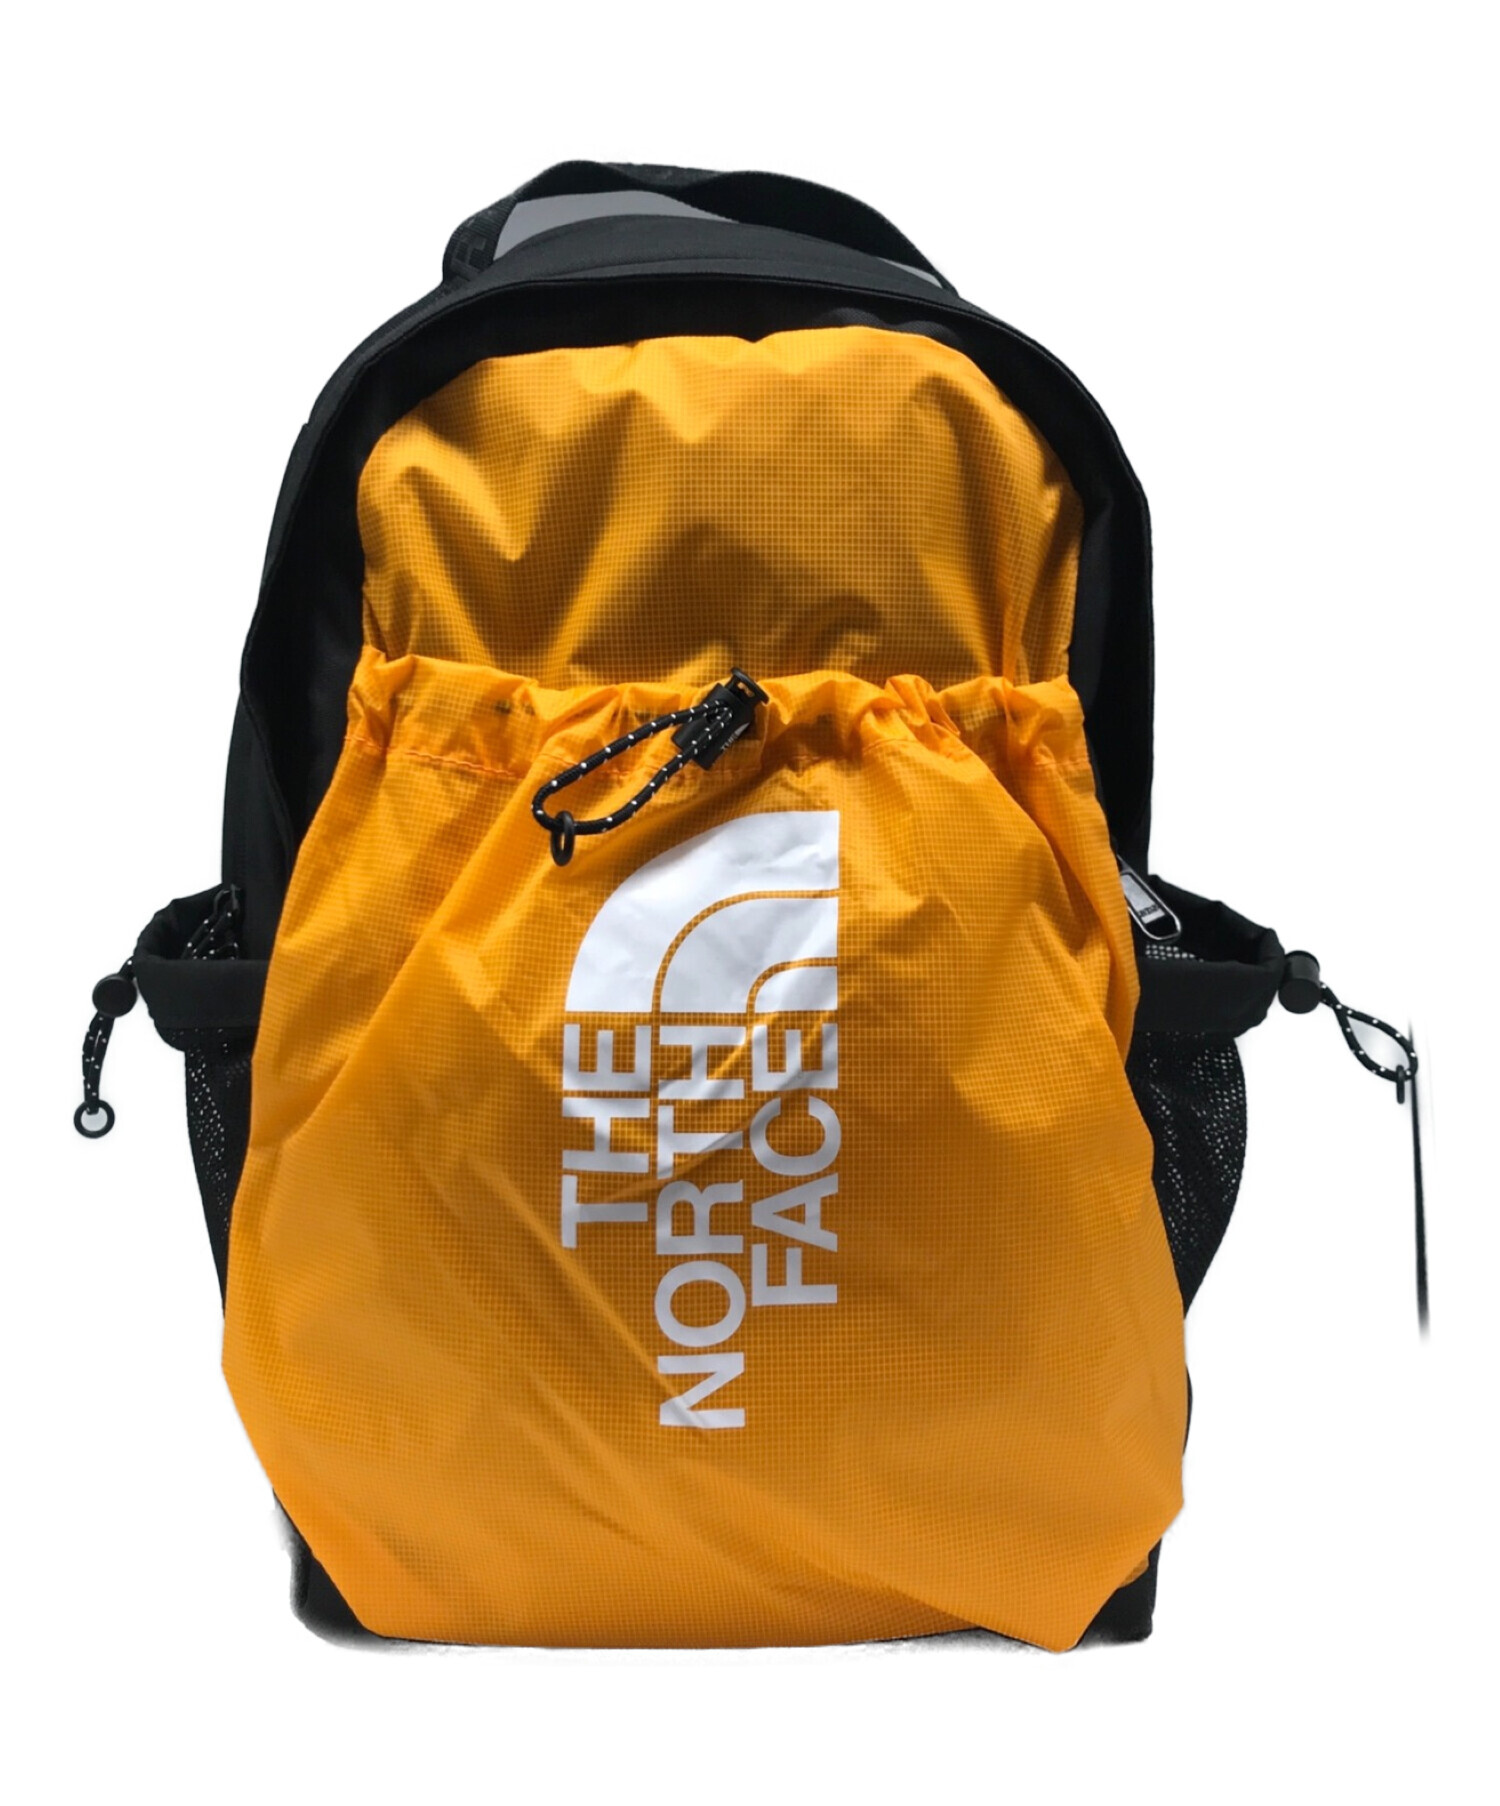 THE NORTH FACE - BOZER BACKPACK リュックサック